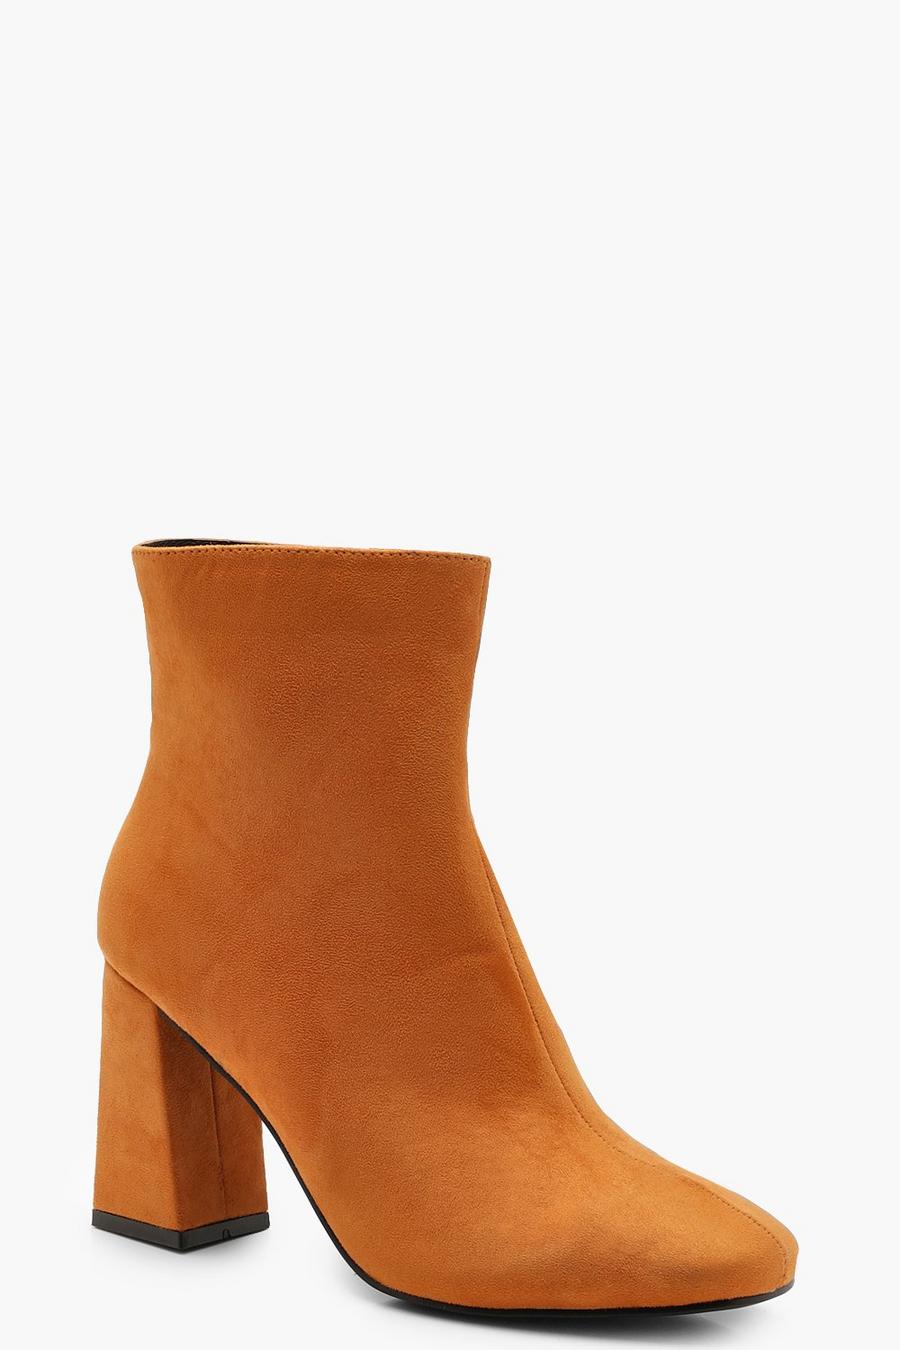 Mustard Square Toe Ankle Boots image number 1